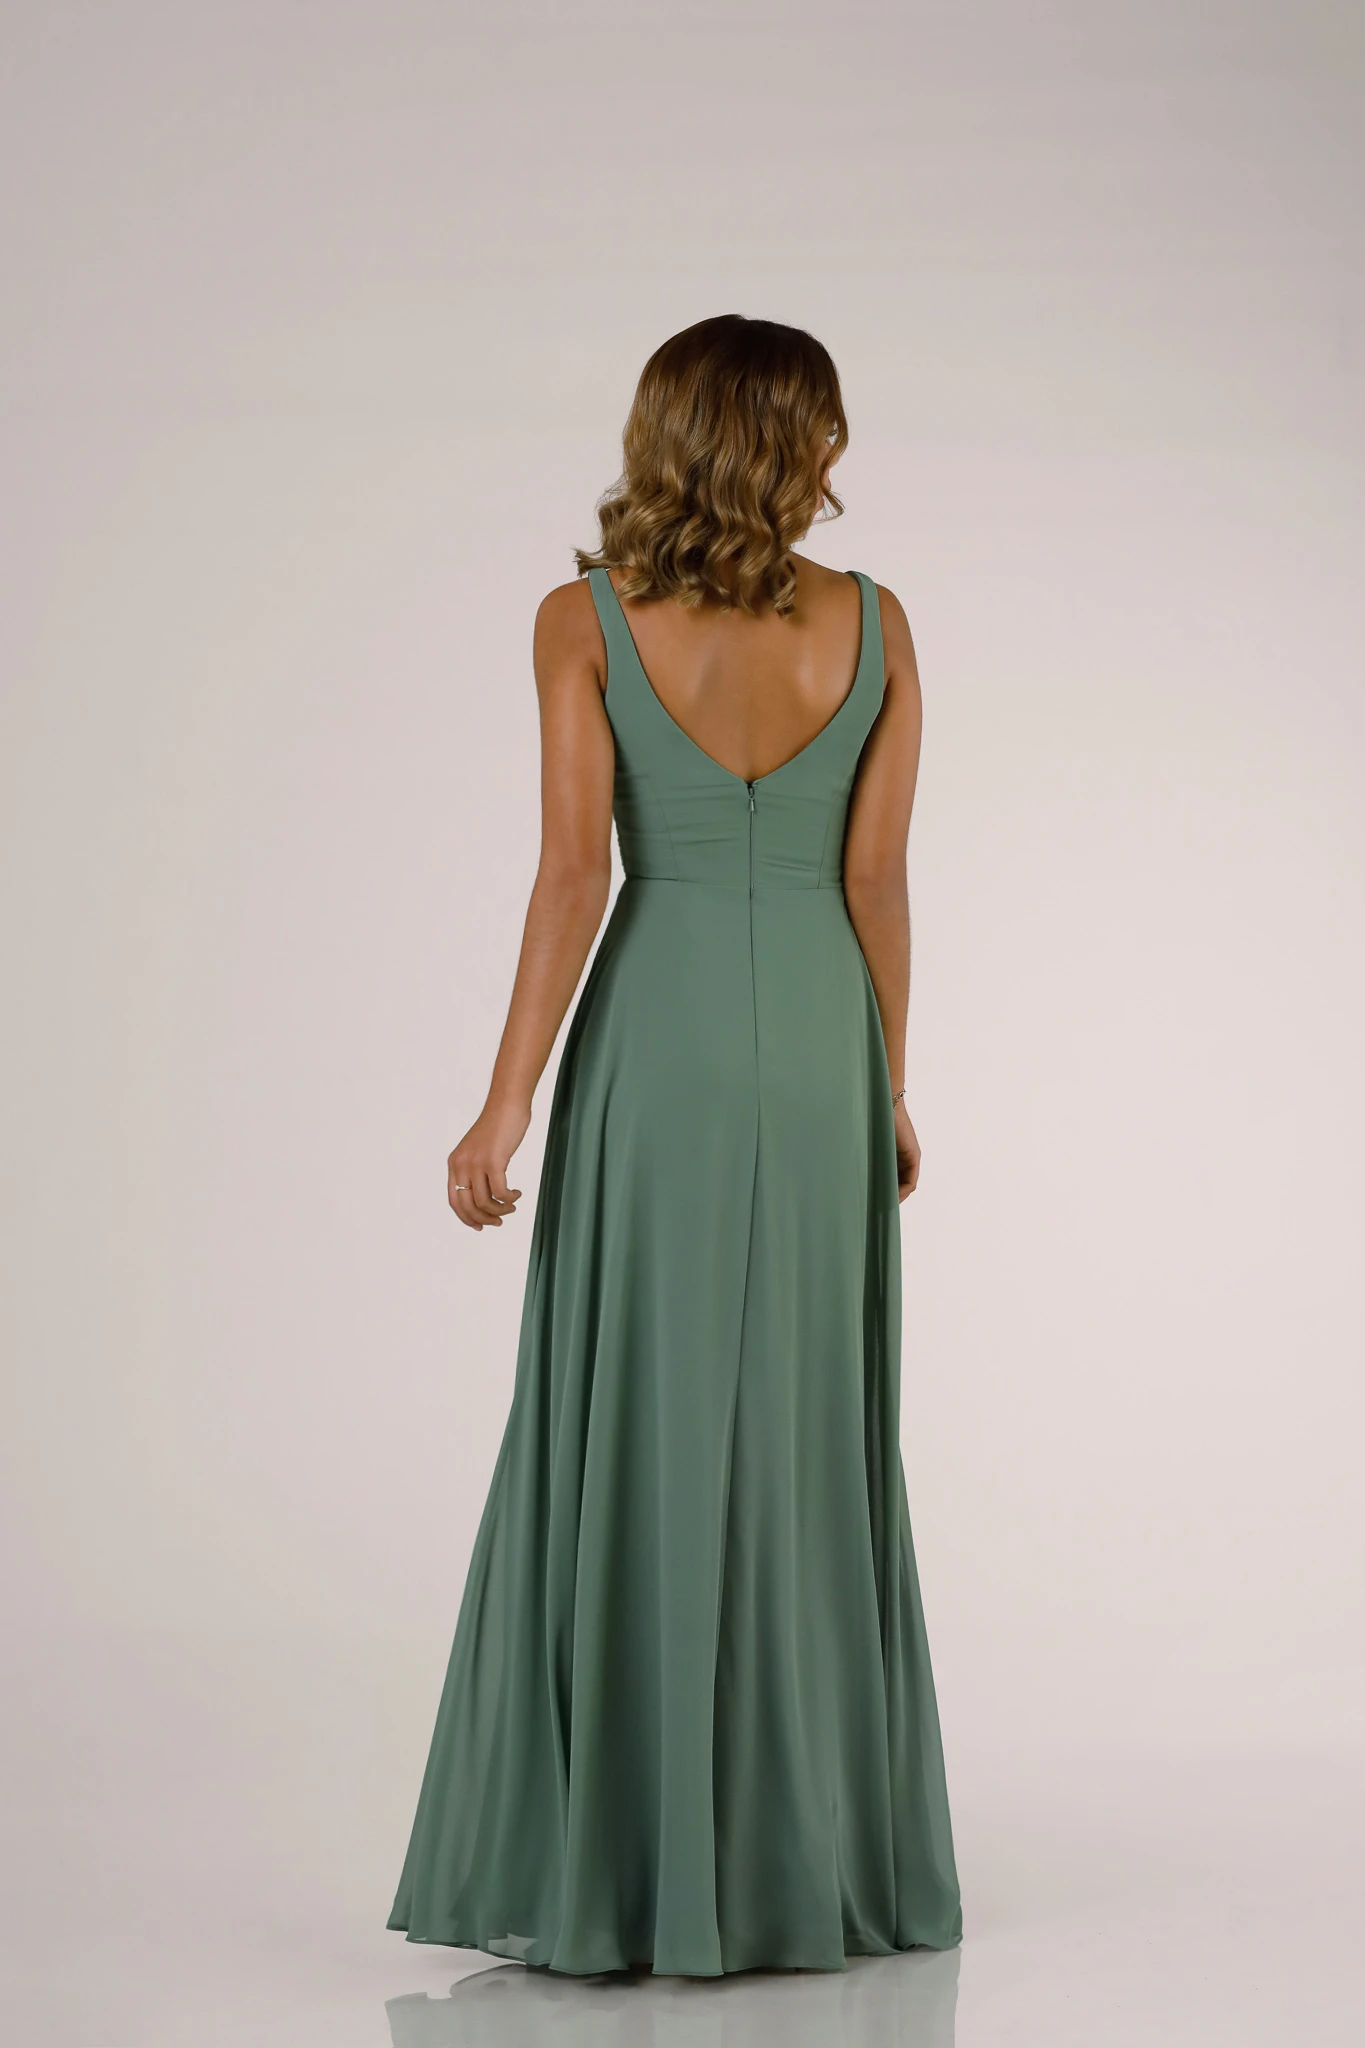 green bridesmaid dress with thick straps and front slit - 9600 by Sorella Vita